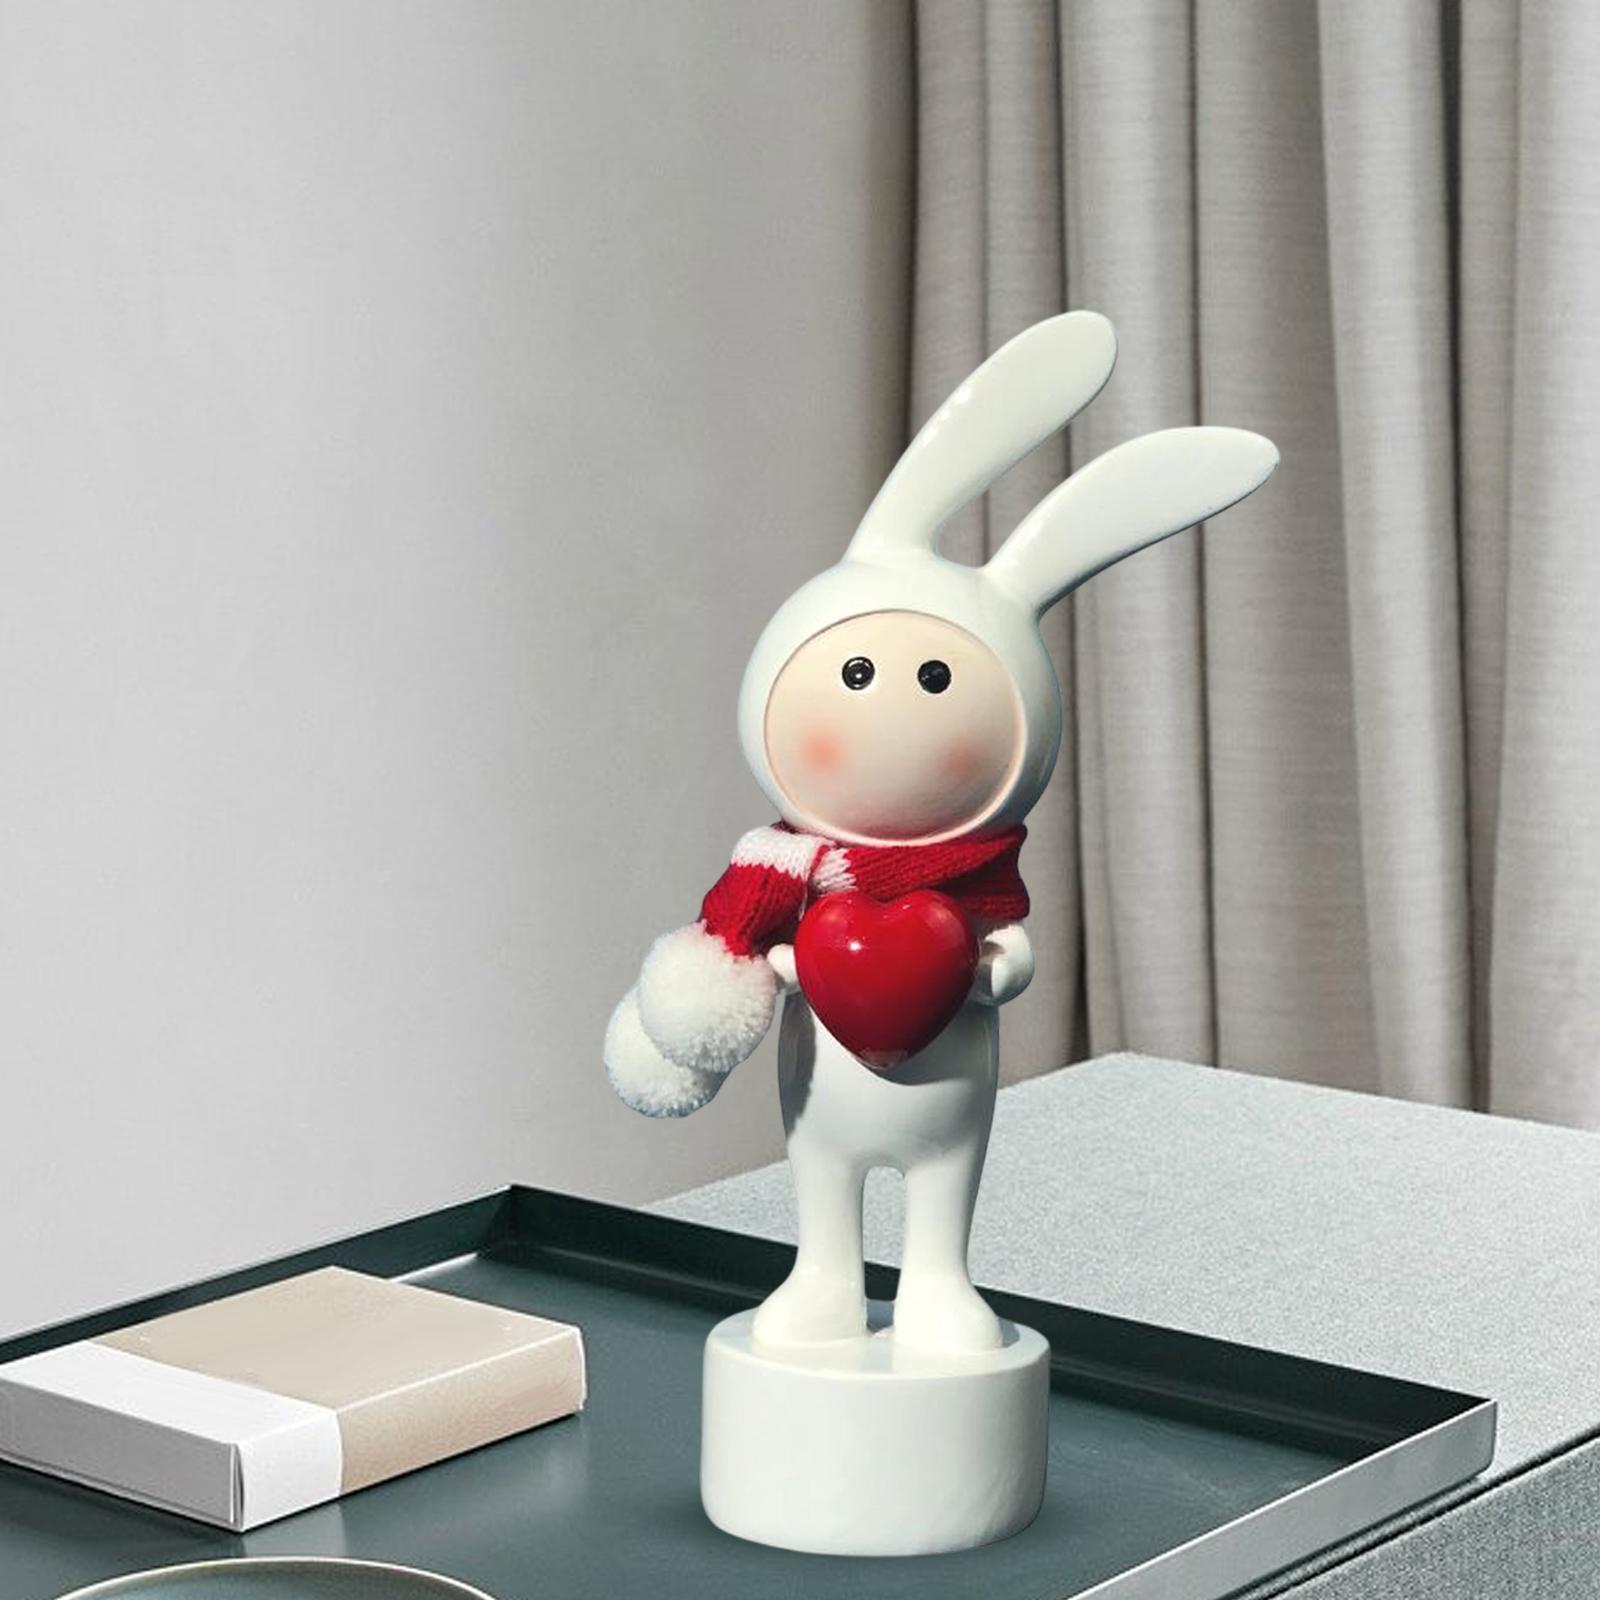 Versatile Rabbit Figurine Creative for Party Fireplace Home Decoration With Scarf